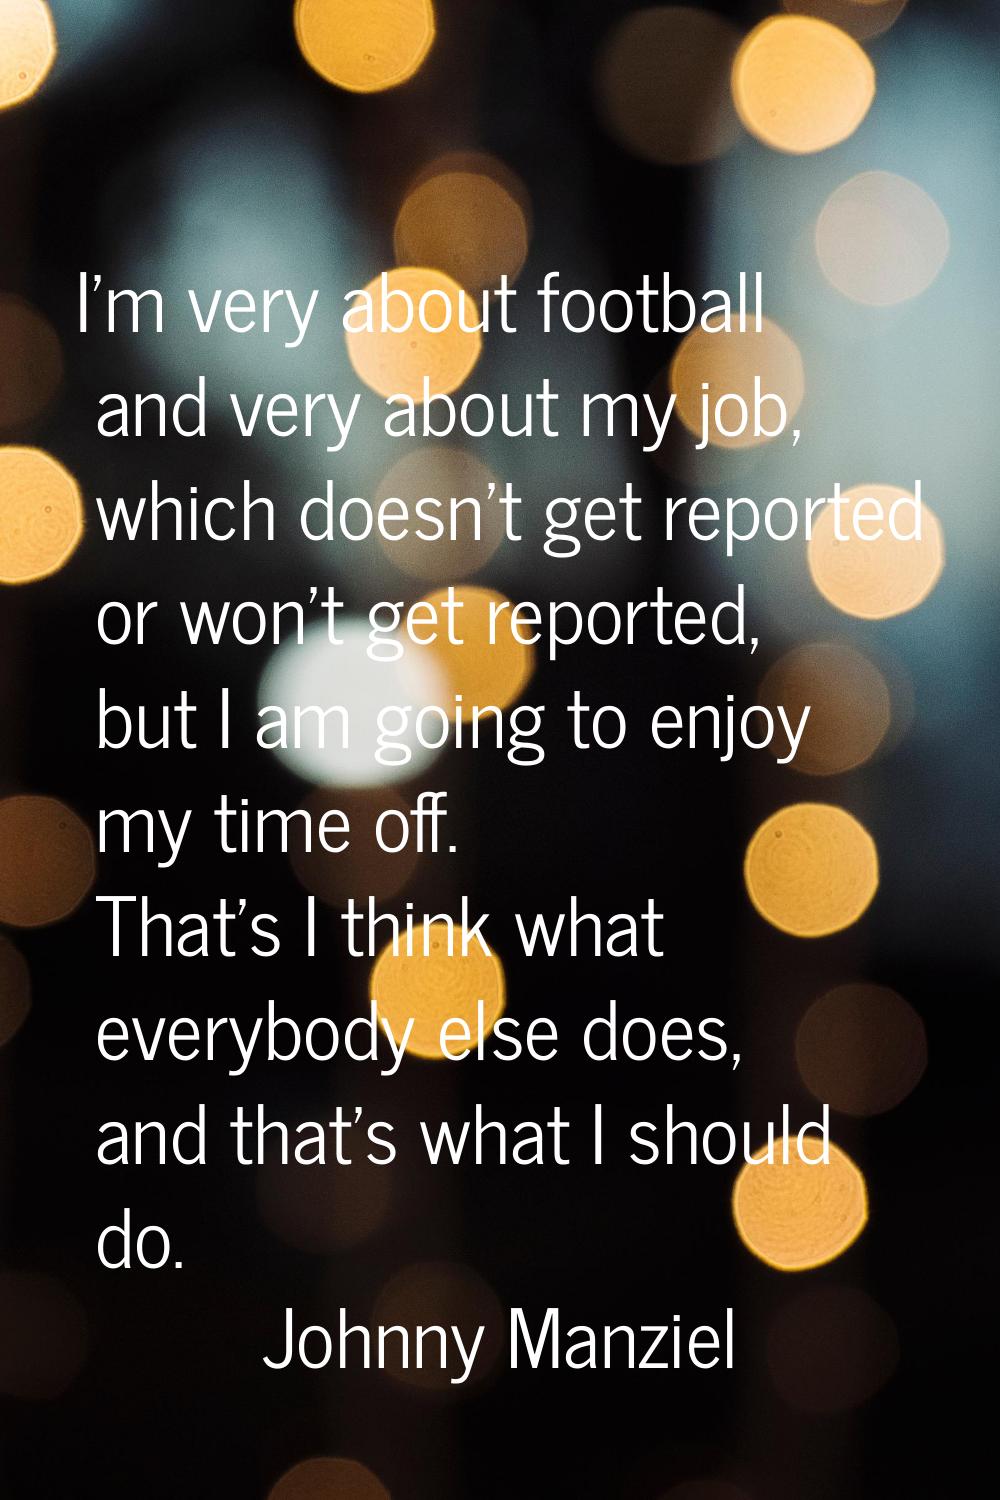 I'm very about football and very about my job, which doesn't get reported or won't get reported, bu